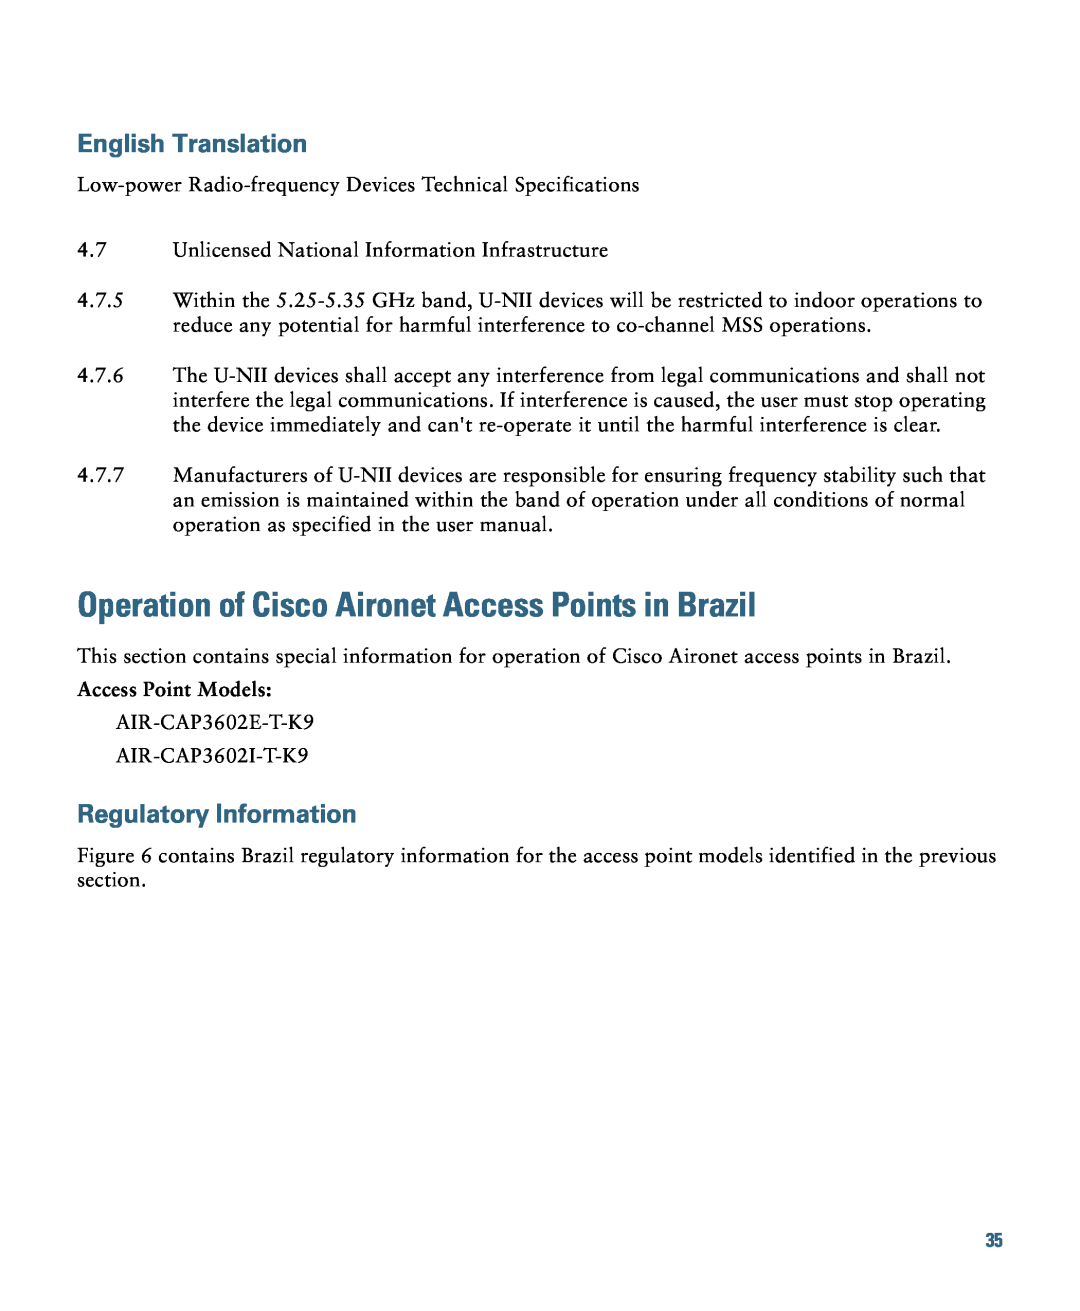 Cisco Systems AIRCAP3602ISK9, AIRCAP3602ITK9 Operation of Cisco Aironet Access Points in Brazil, Regulatory Information 